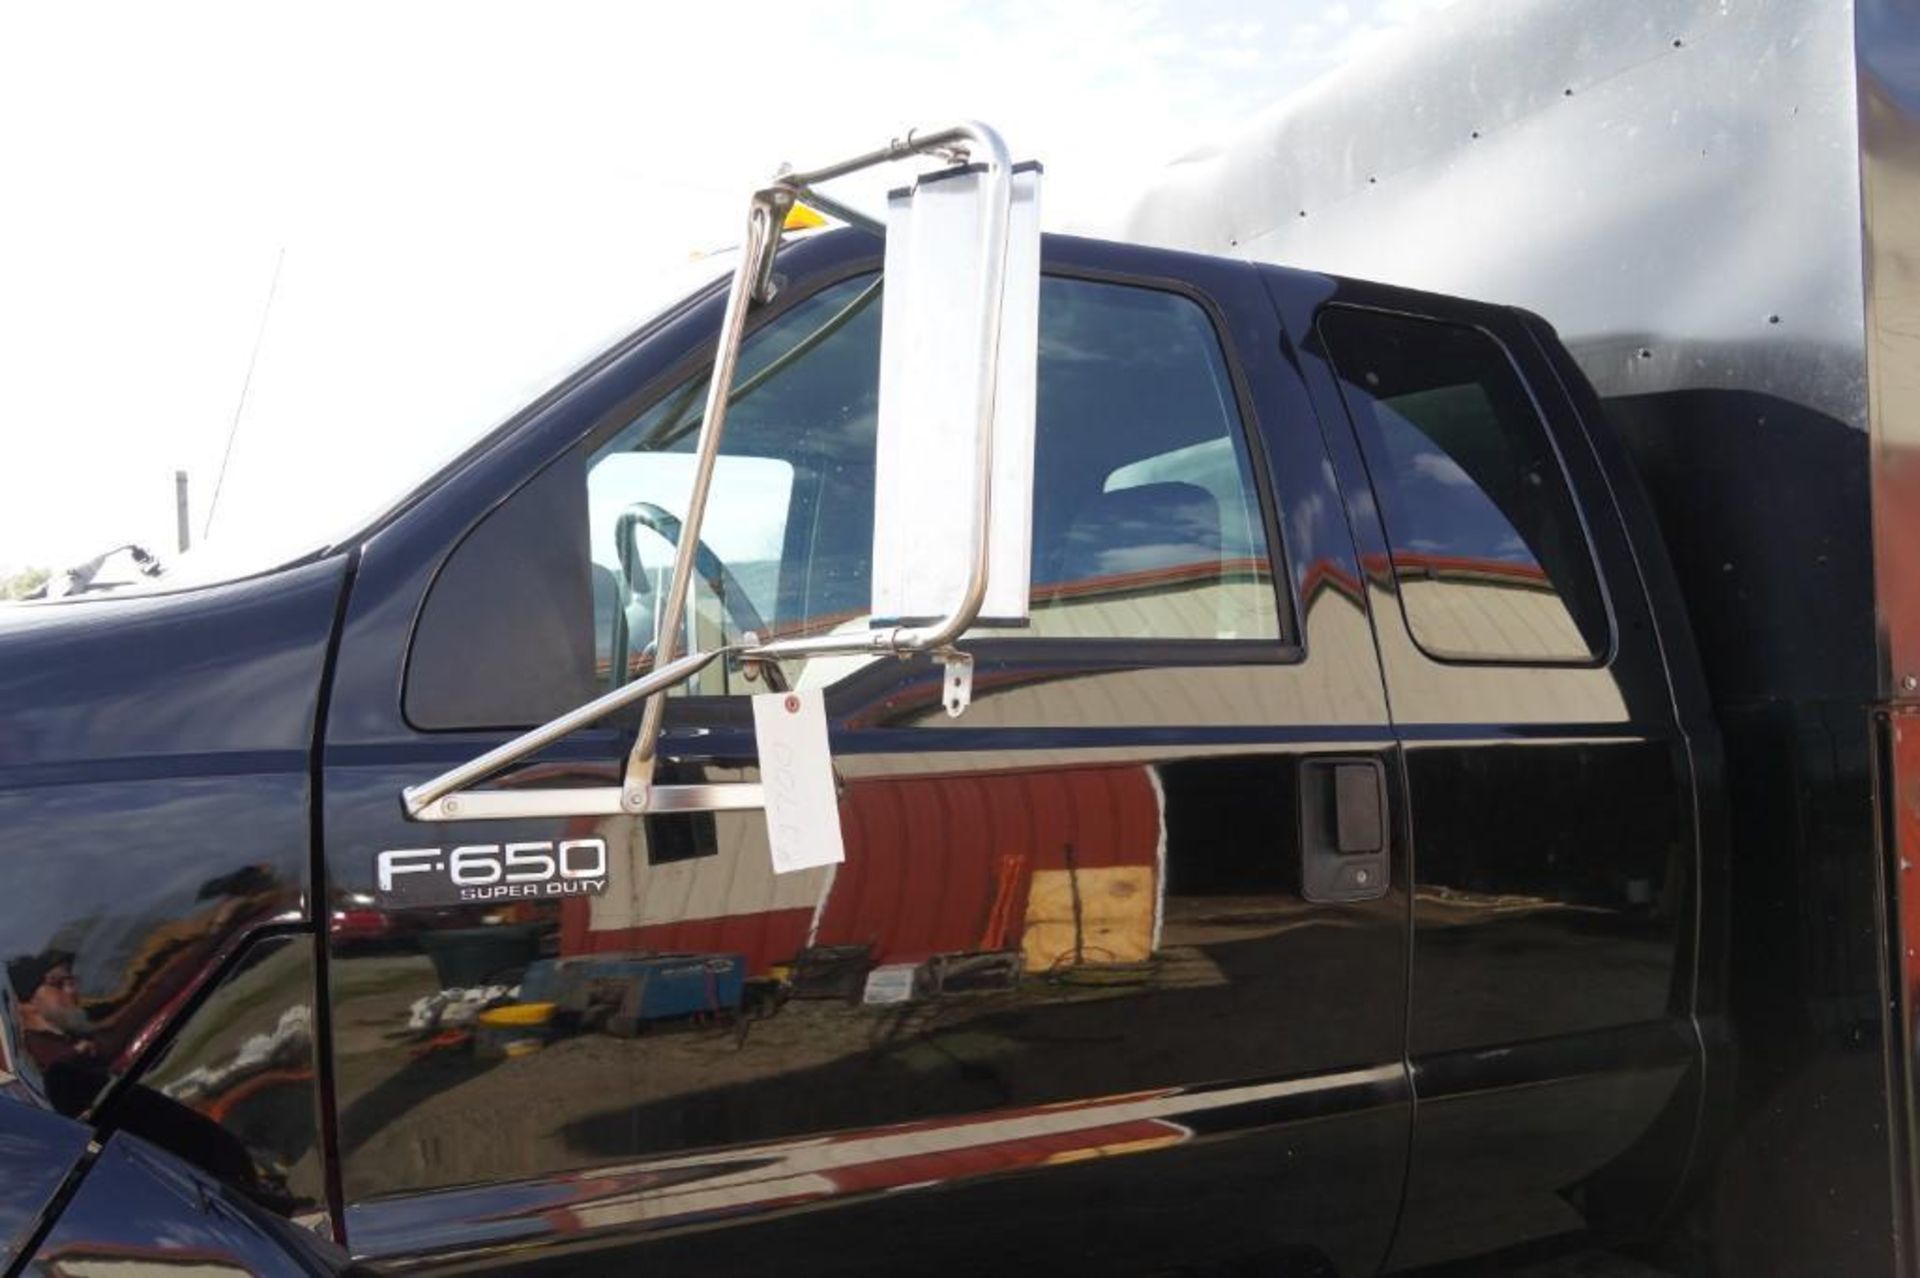 2000 Ford F-650 Super Duty XLT Service Truck - Image 25 of 67